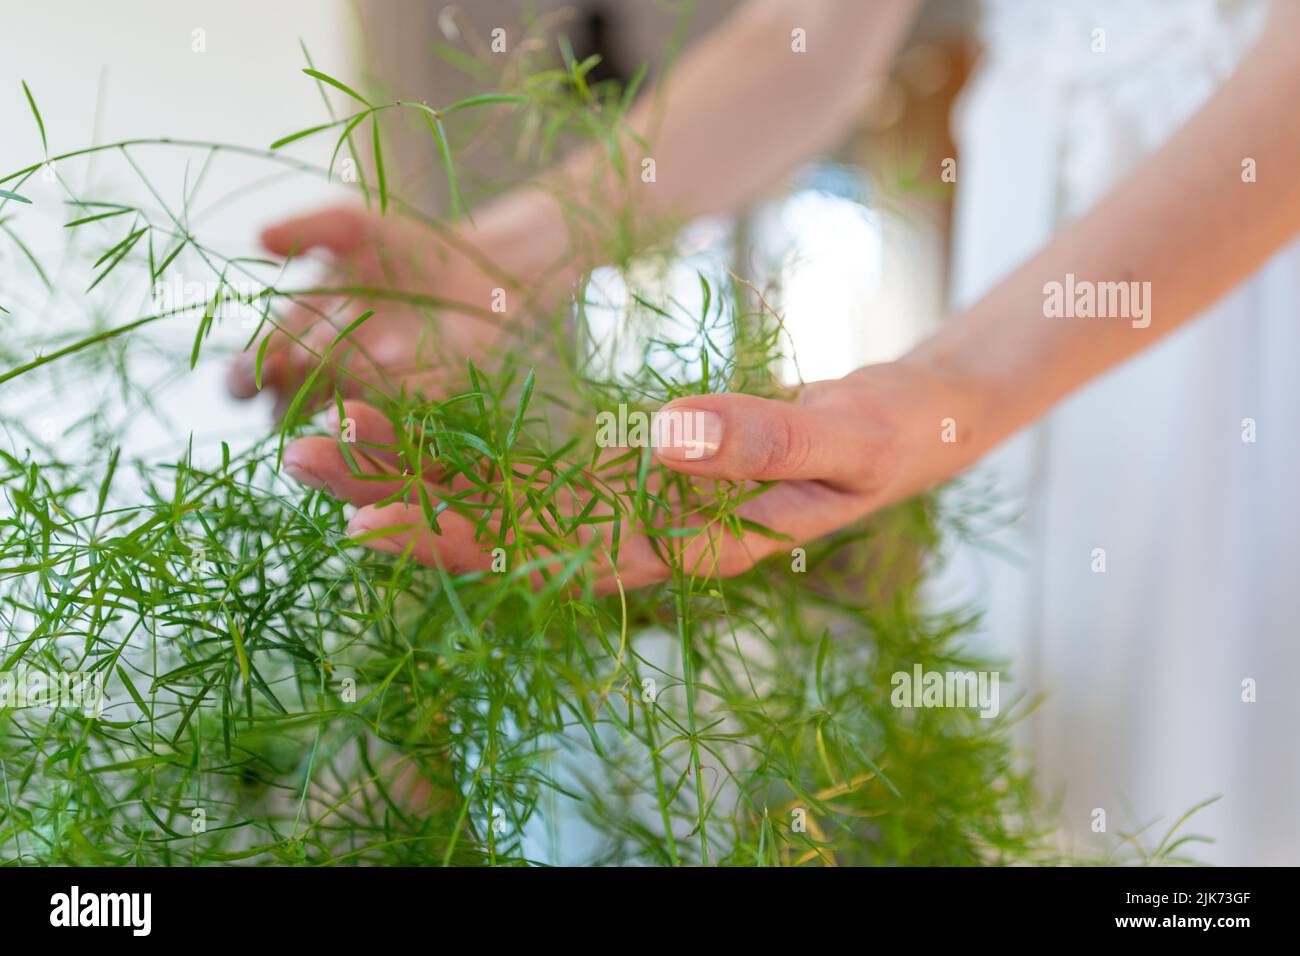 Woman's hands holding an asparagus plant's leaves Stock Photo